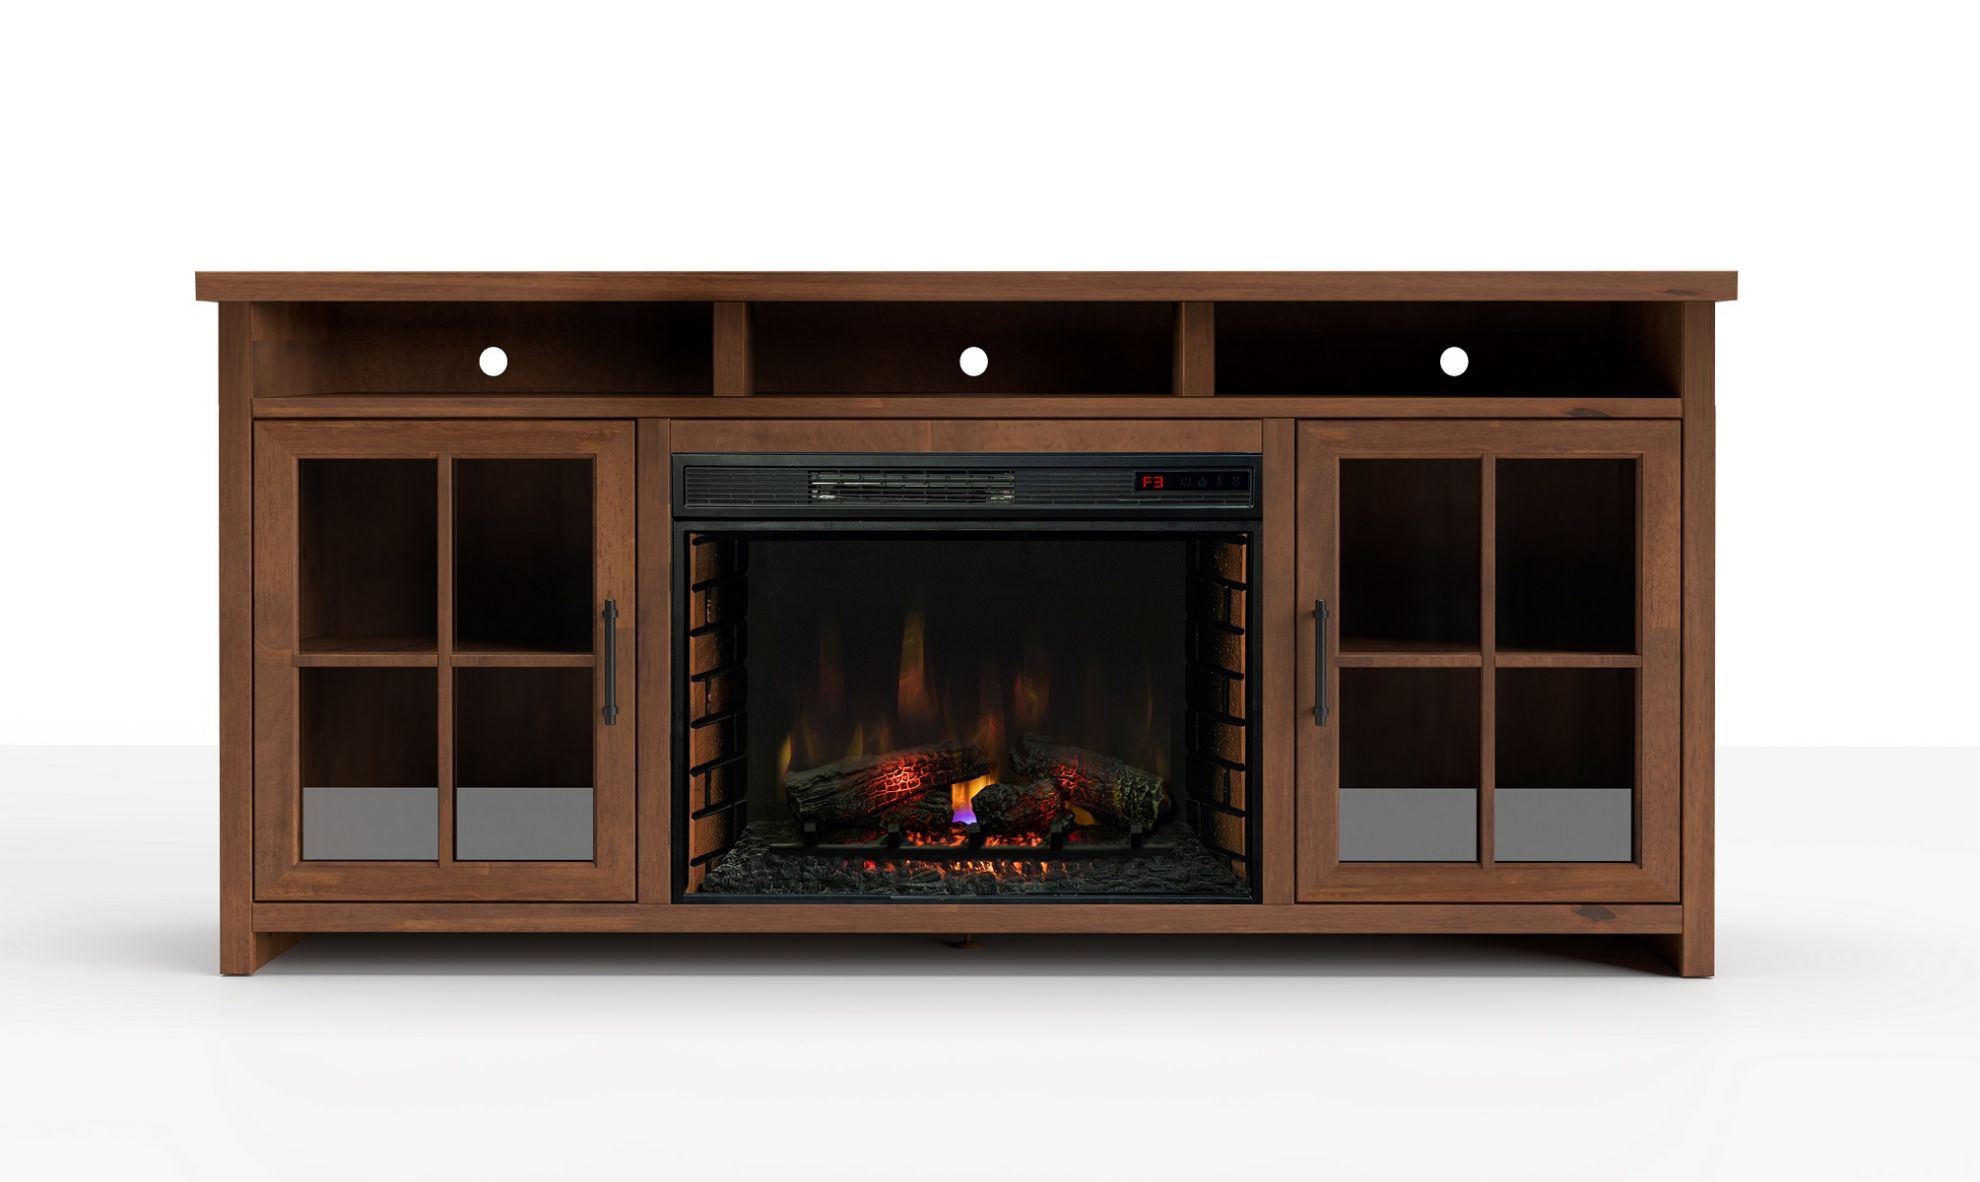 Spencer Fireplace Console